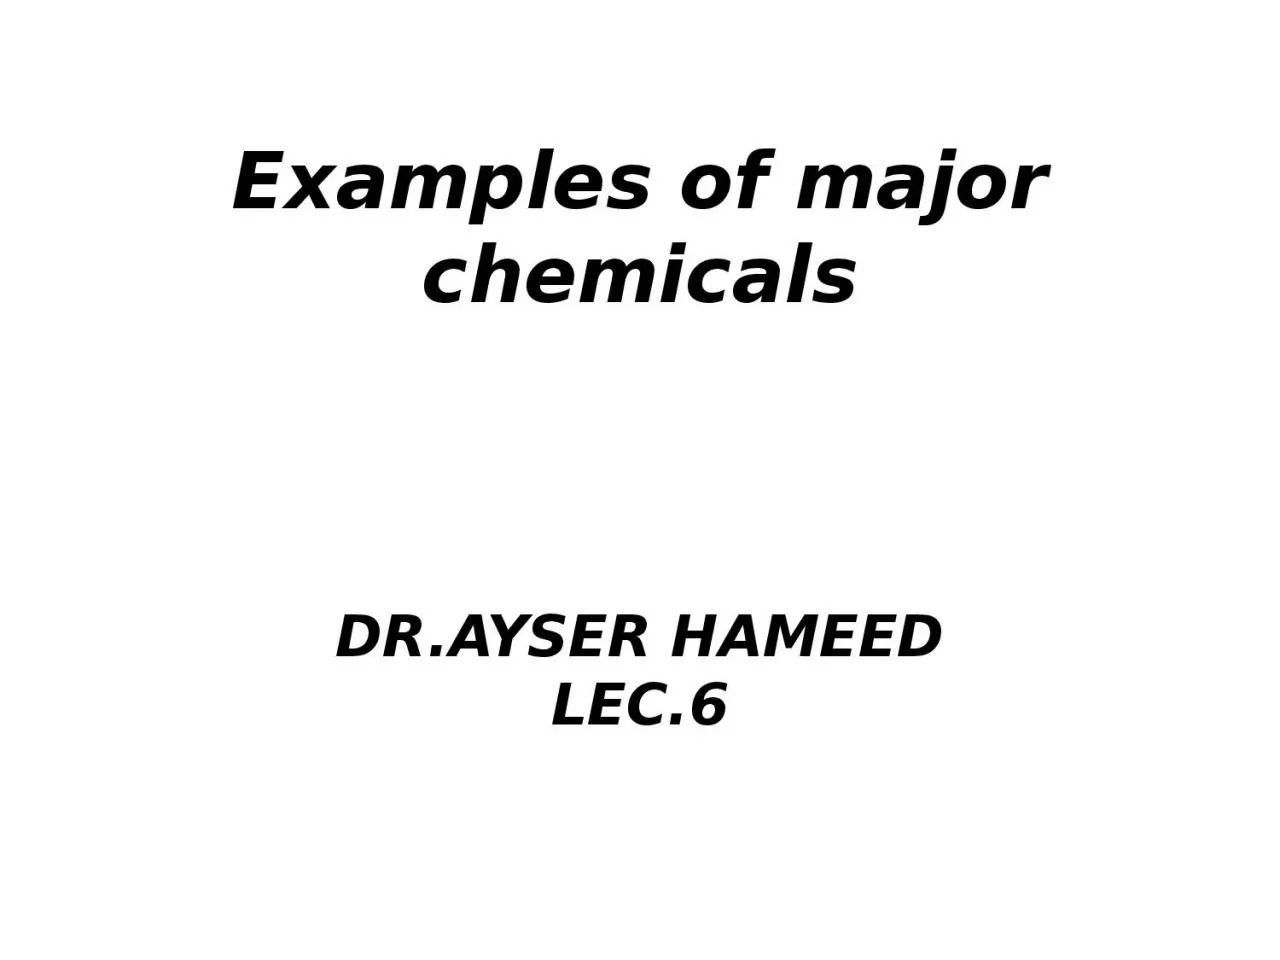 Examples of major chemicals